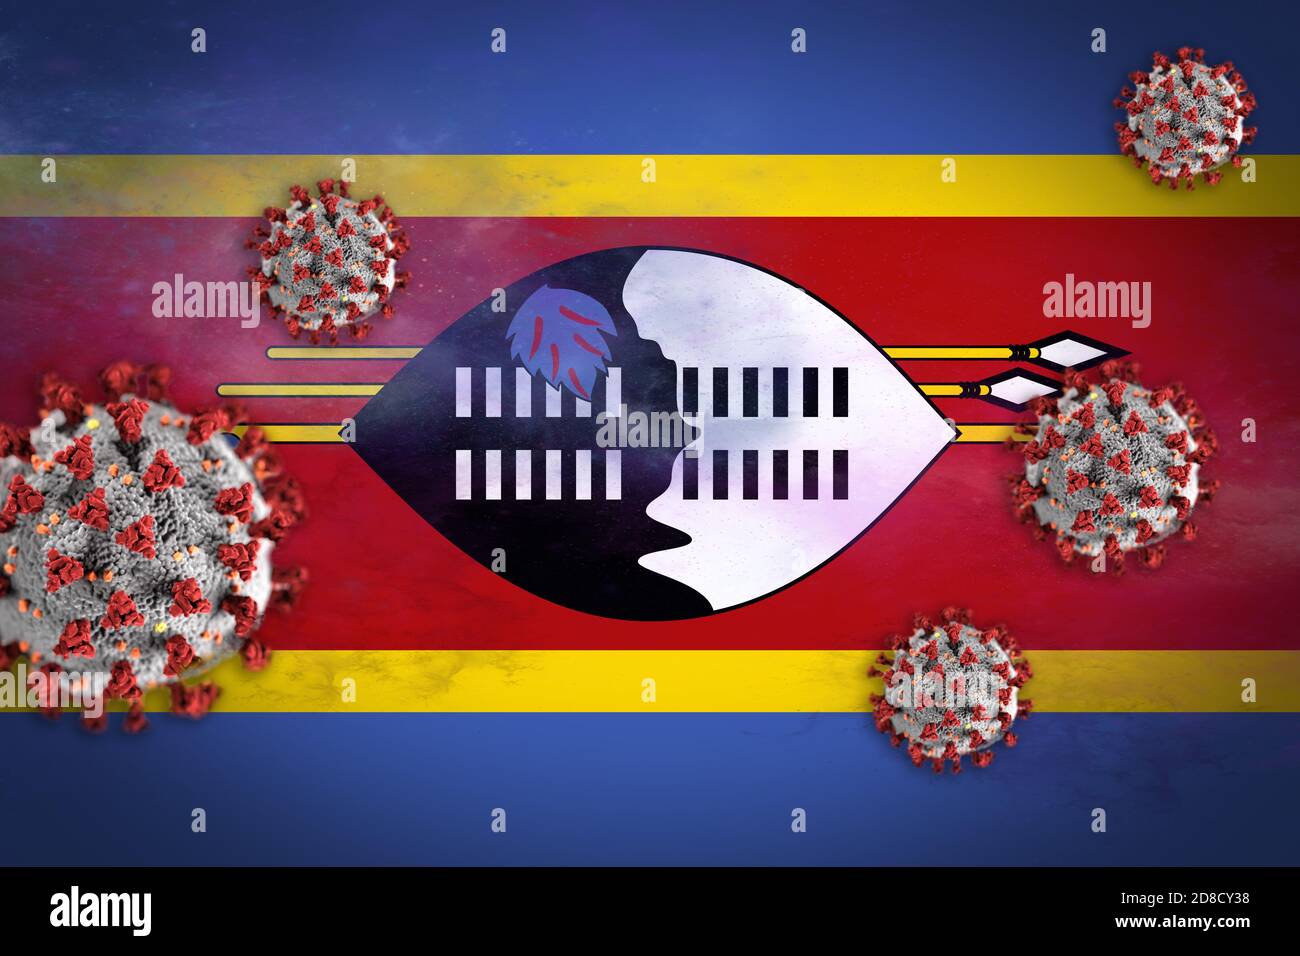 Concept illustration of Coronavirus or Covid-19 particles overshadowing flag of Swaziland symbolising outbreak. Stock Photo